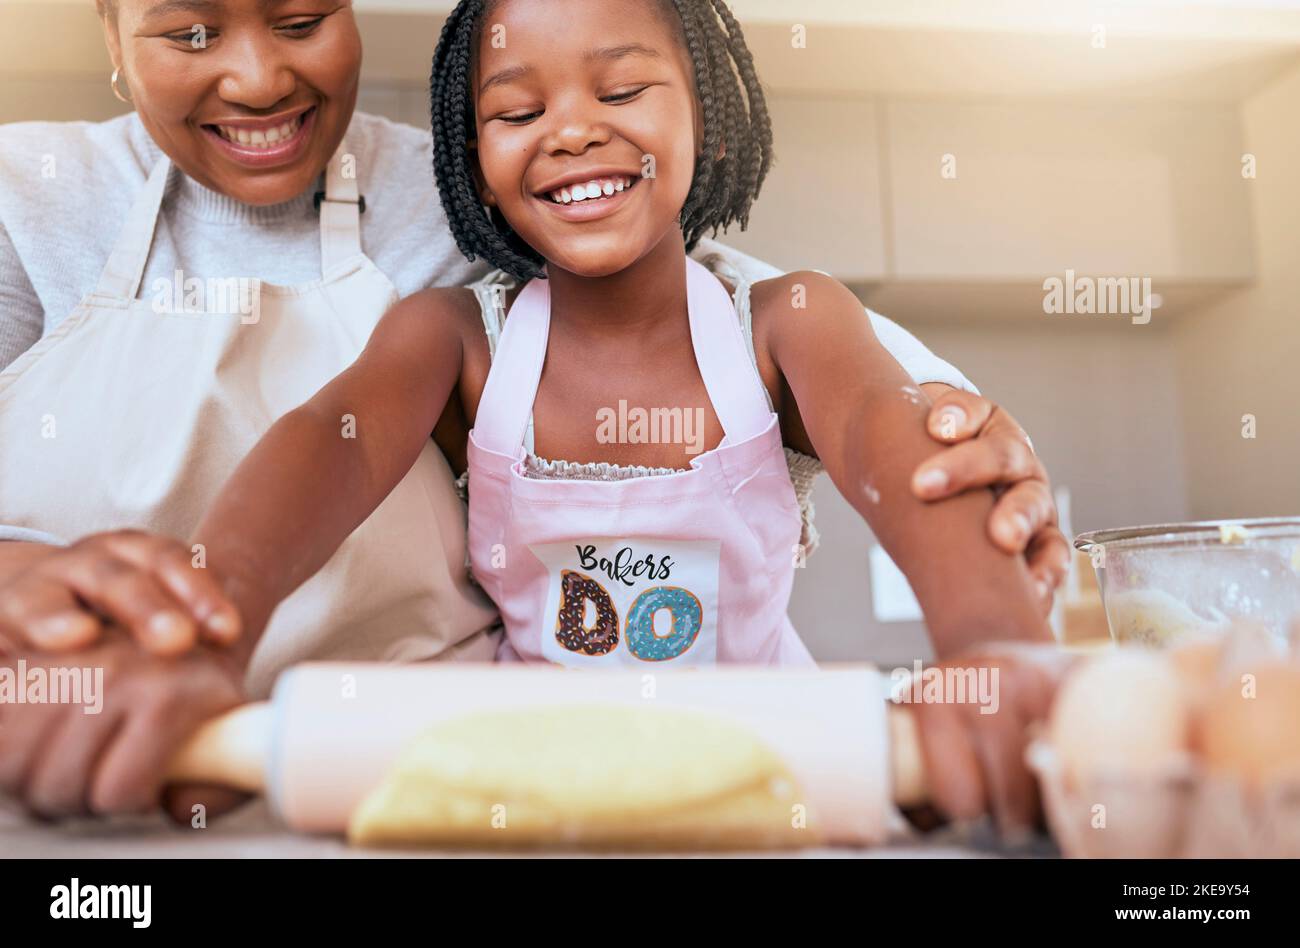 https://c8.alamy.com/comp/2KE9Y54/baking-mother-and-child-helping-in-the-kitchen-learning-and-smile-for-rolling-dough-together-in-a-house-food-happy-and-african-mom-teaching-a-girl-2KE9Y54.jpg